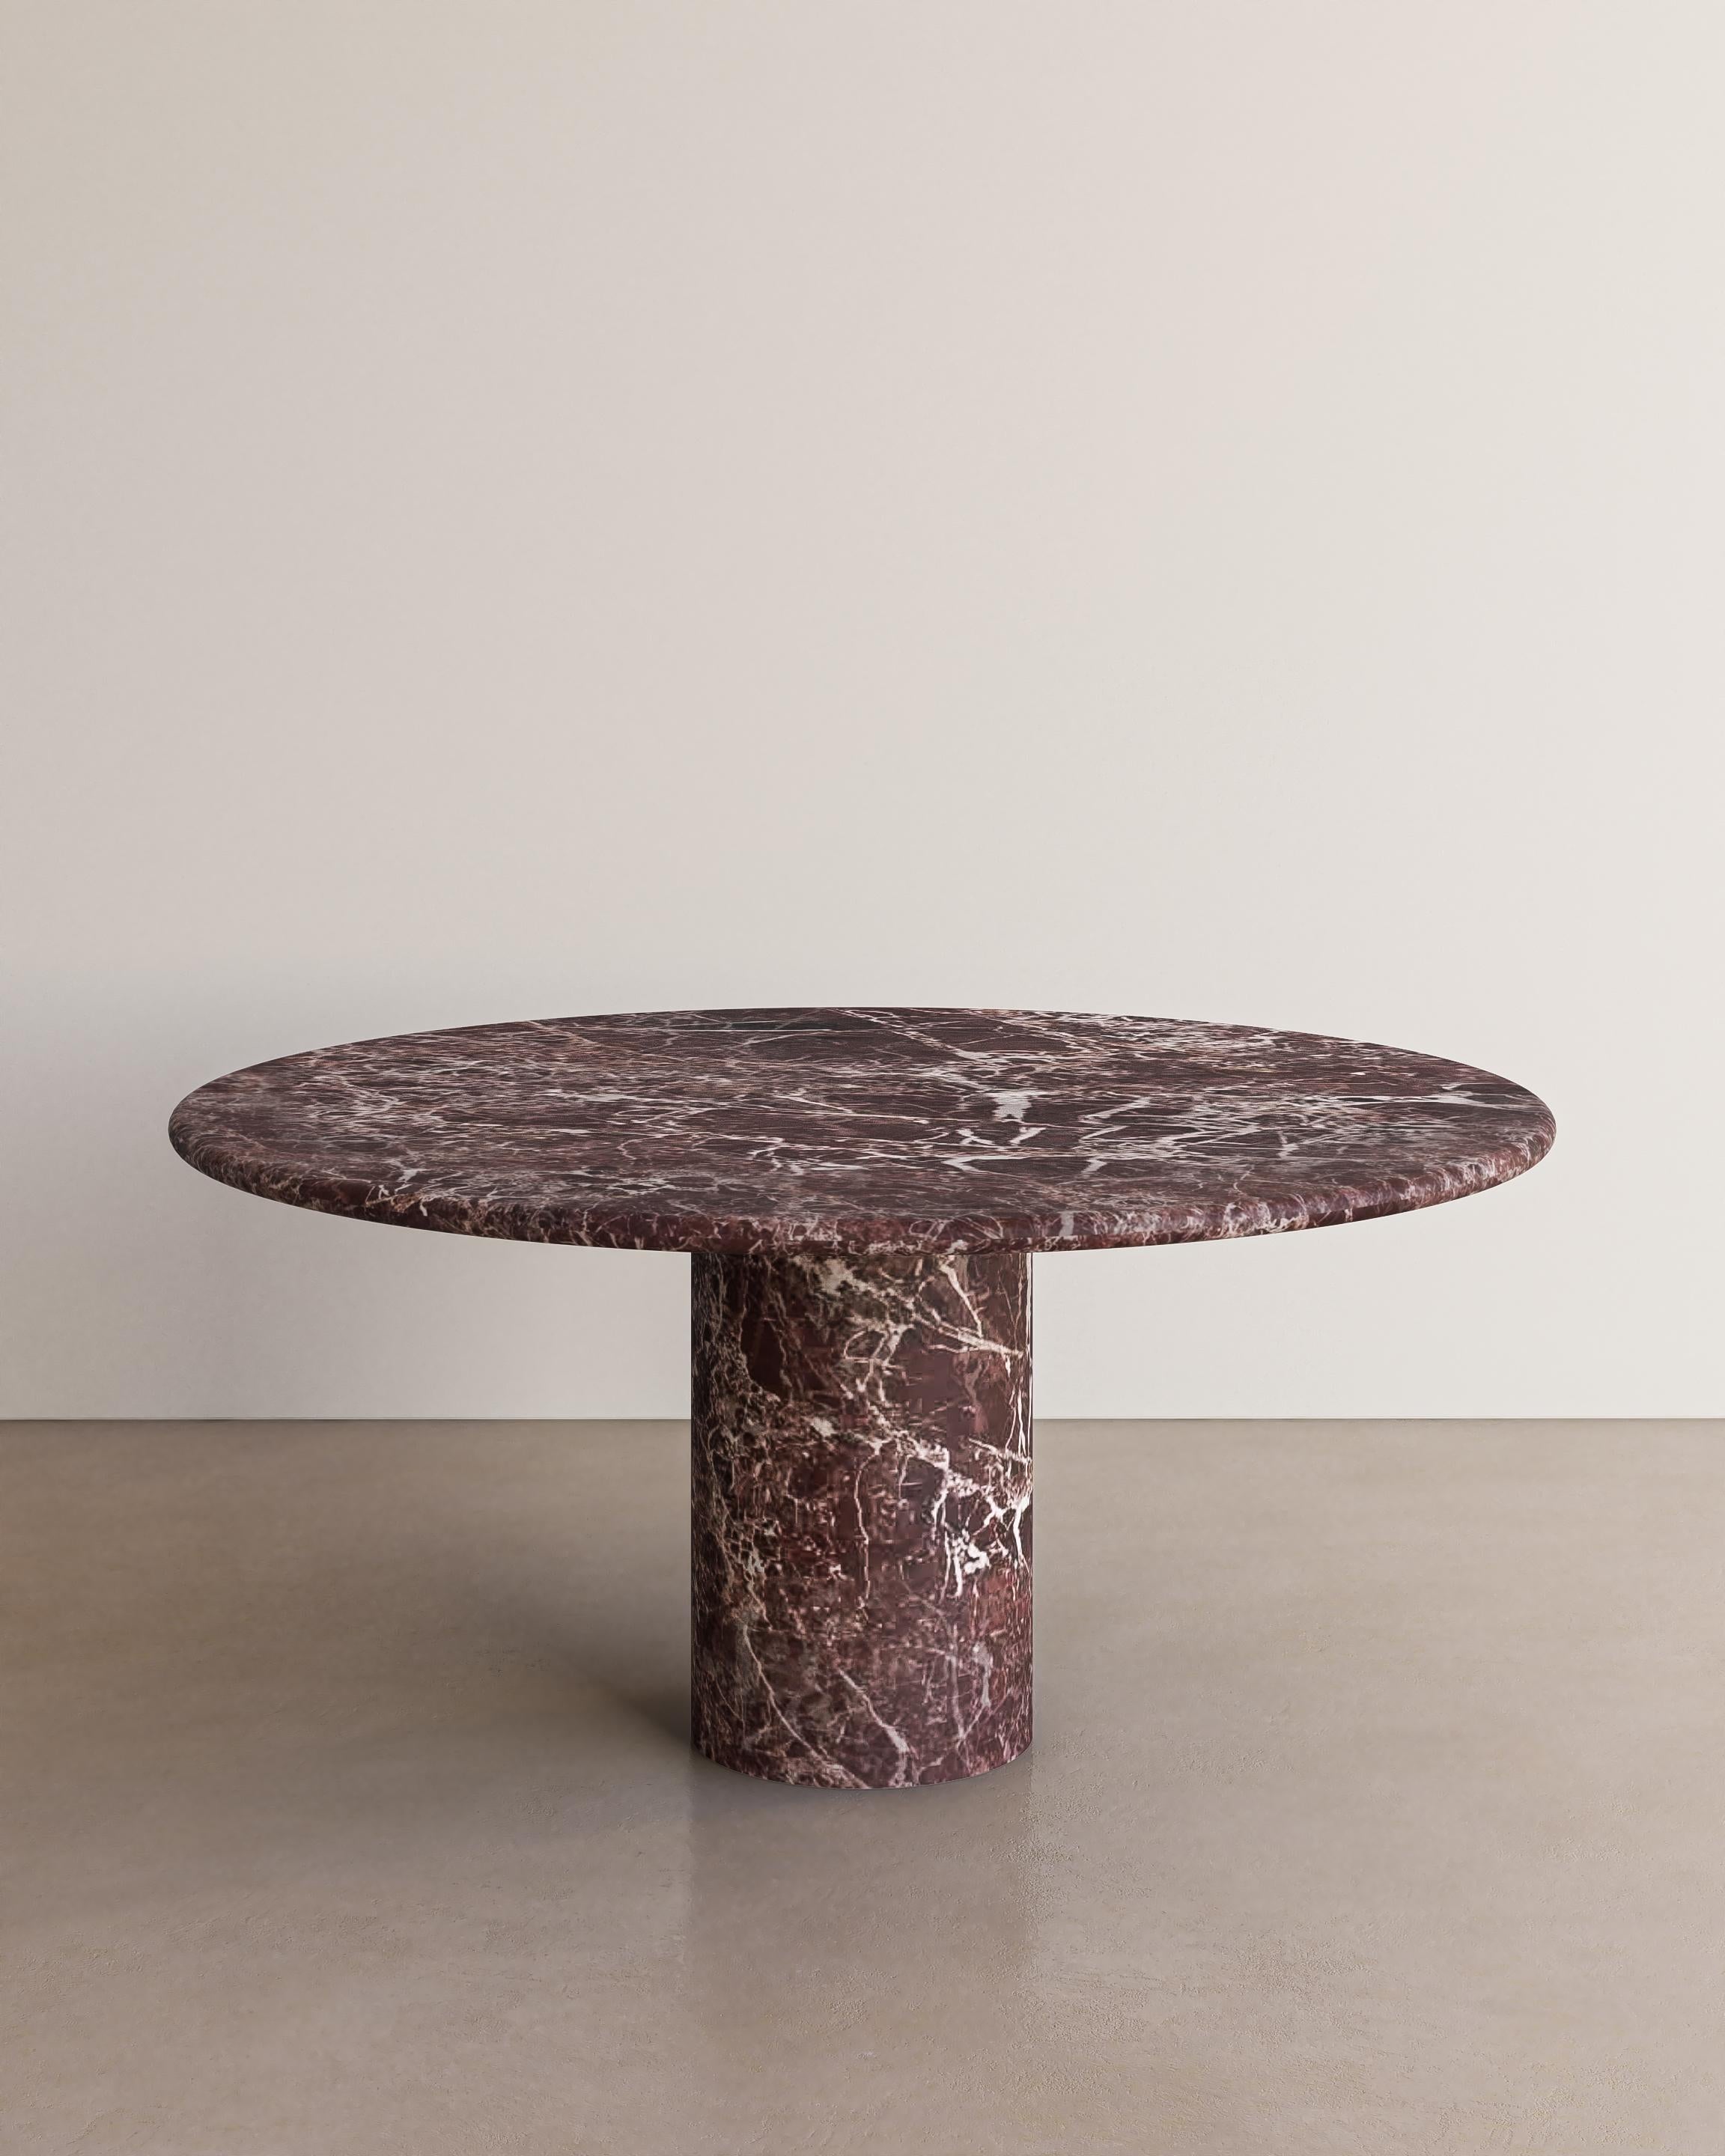 Desert Red Travertine Voyage Dining Table i by the Essentialist For Sale 6